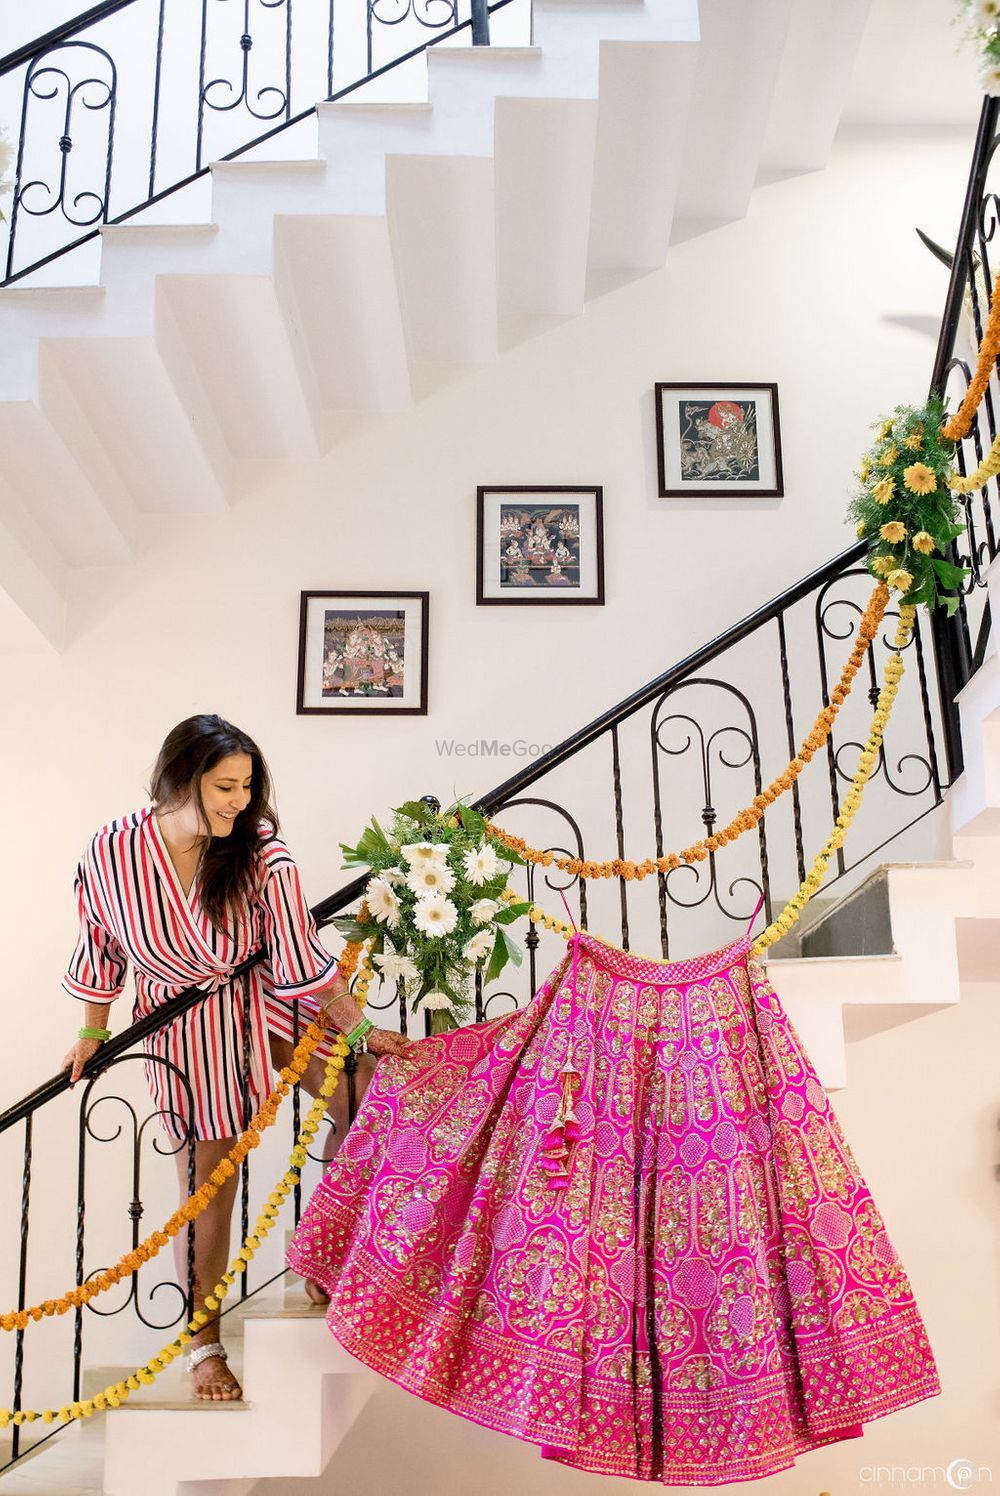 Photo of Bride getting ready shot with bright pink lehenga on hanger